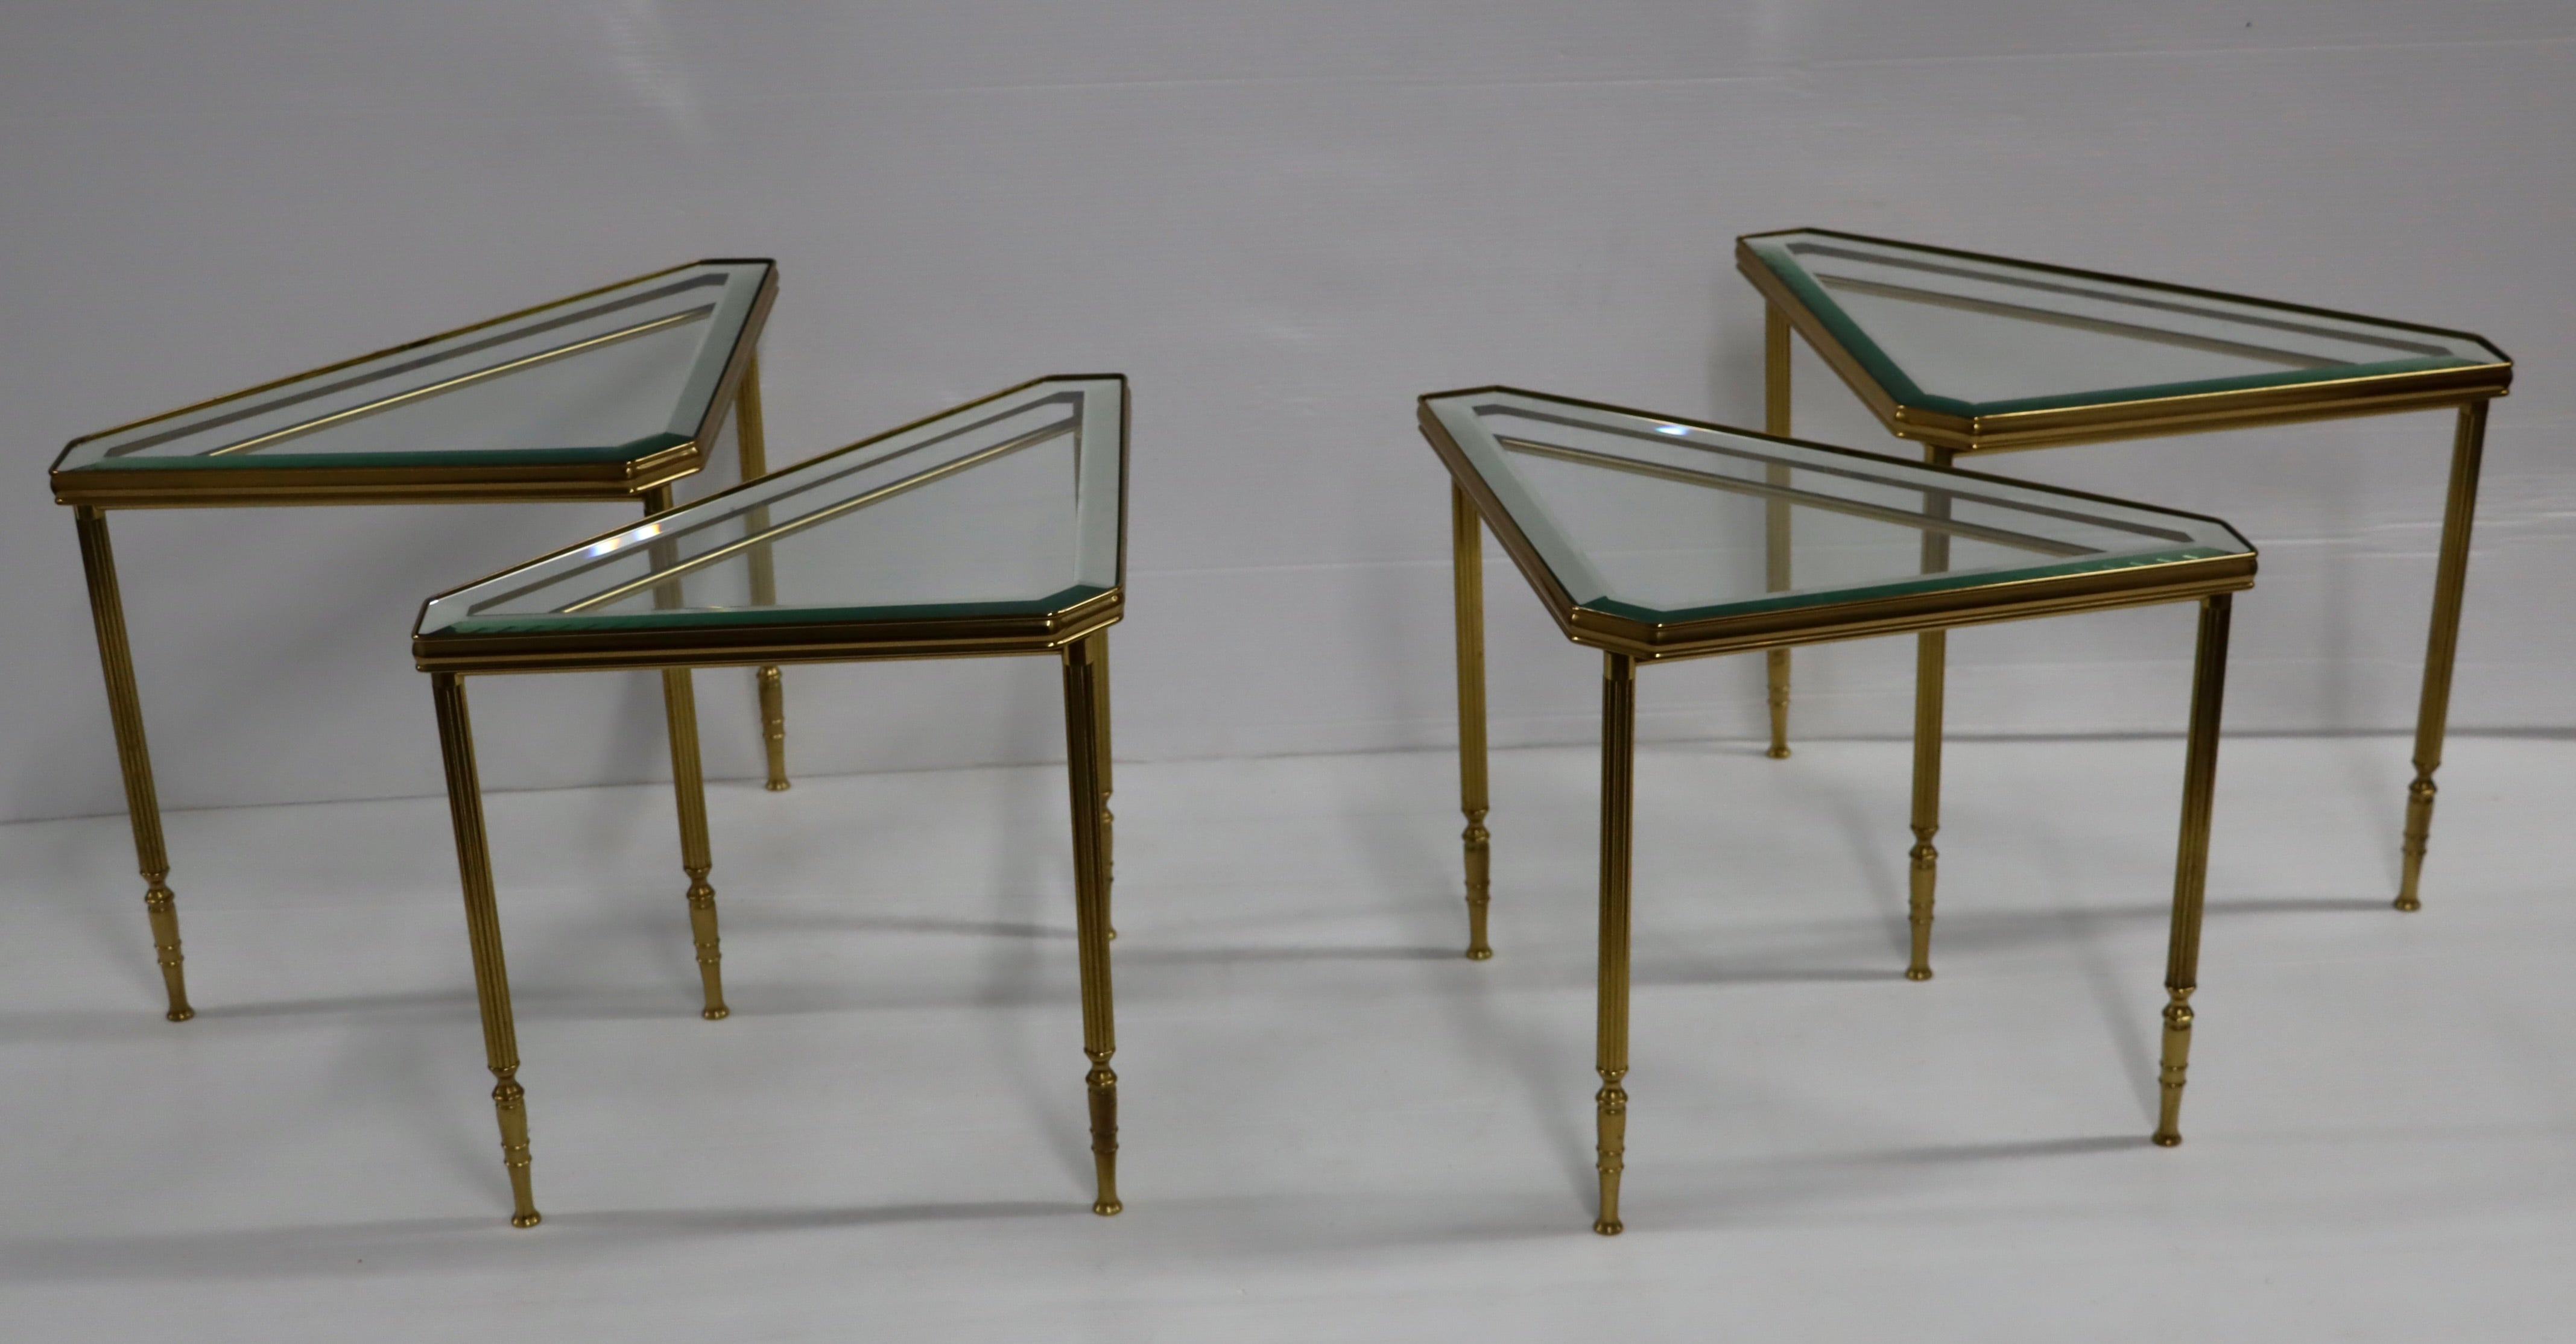 Set of 4 1950's solid brass Mid-Century Modern triangular side tables / coffee table with mirror edges glass inserts, in vintage original condition with some wear and patina due to age and use.